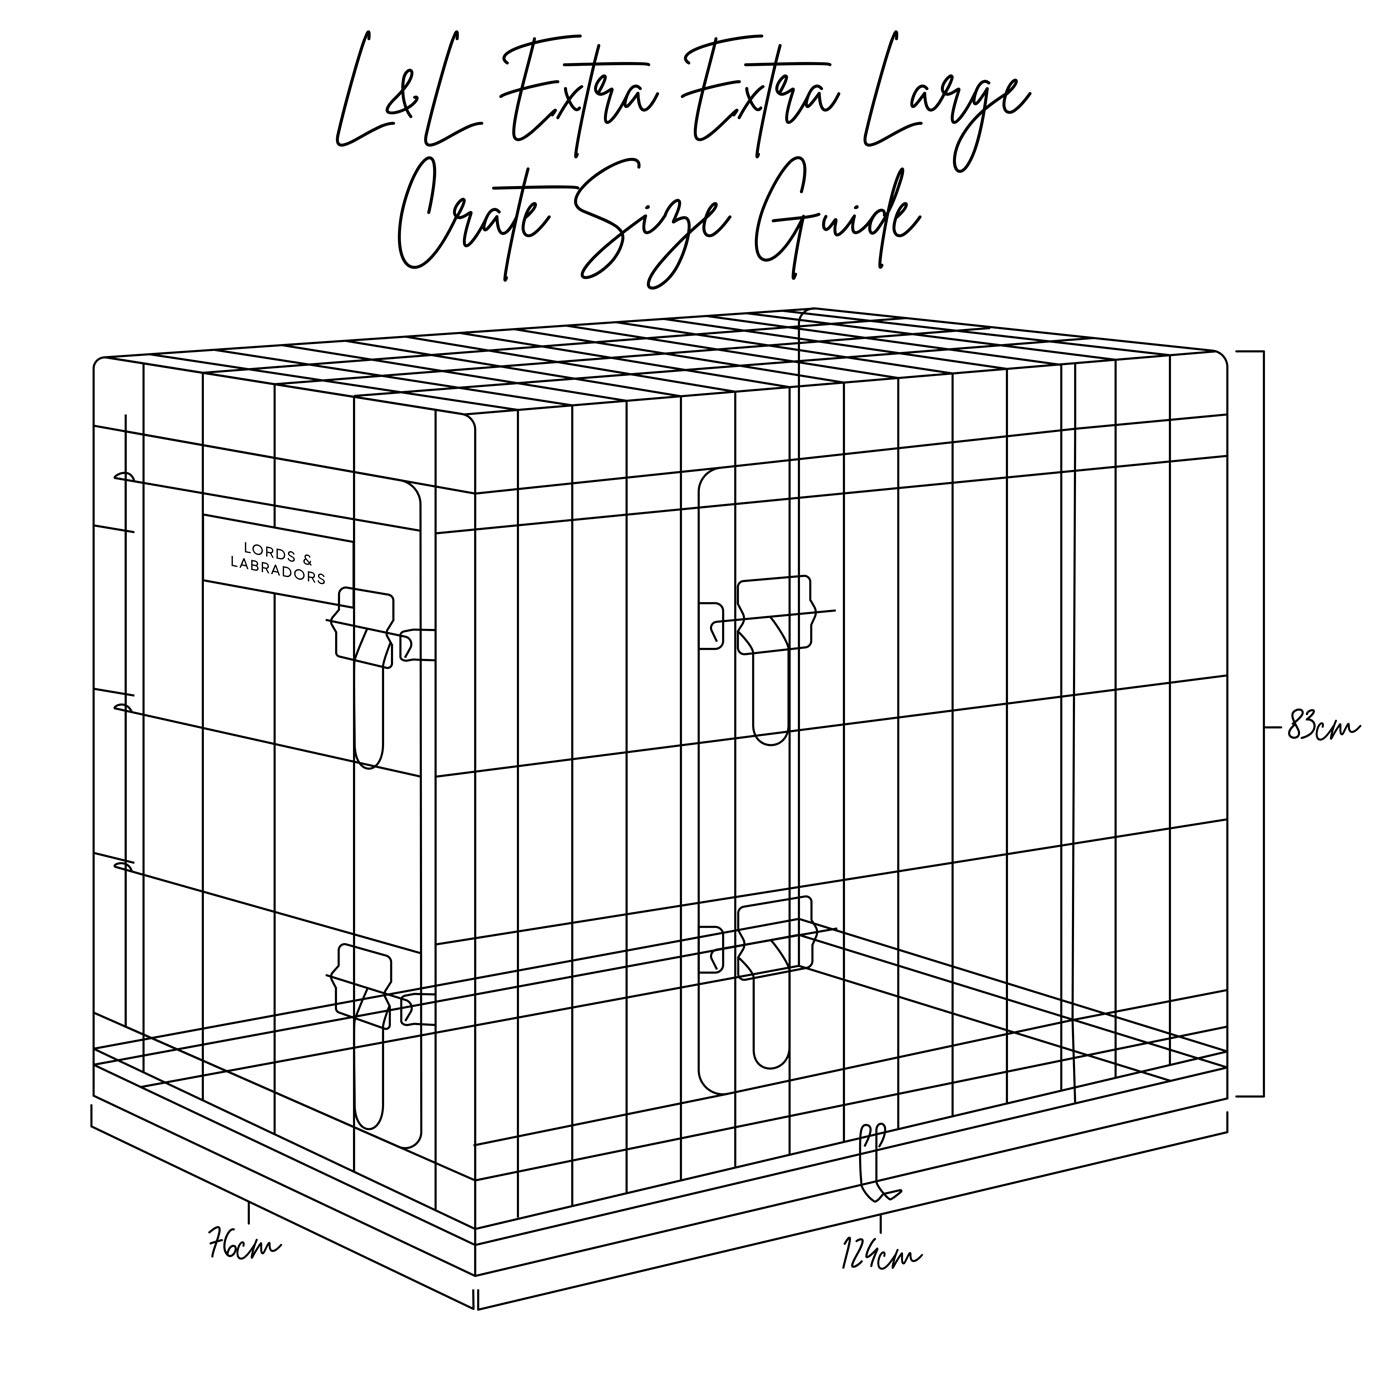 Lords and Labradors extra extra large crate size guide illustration